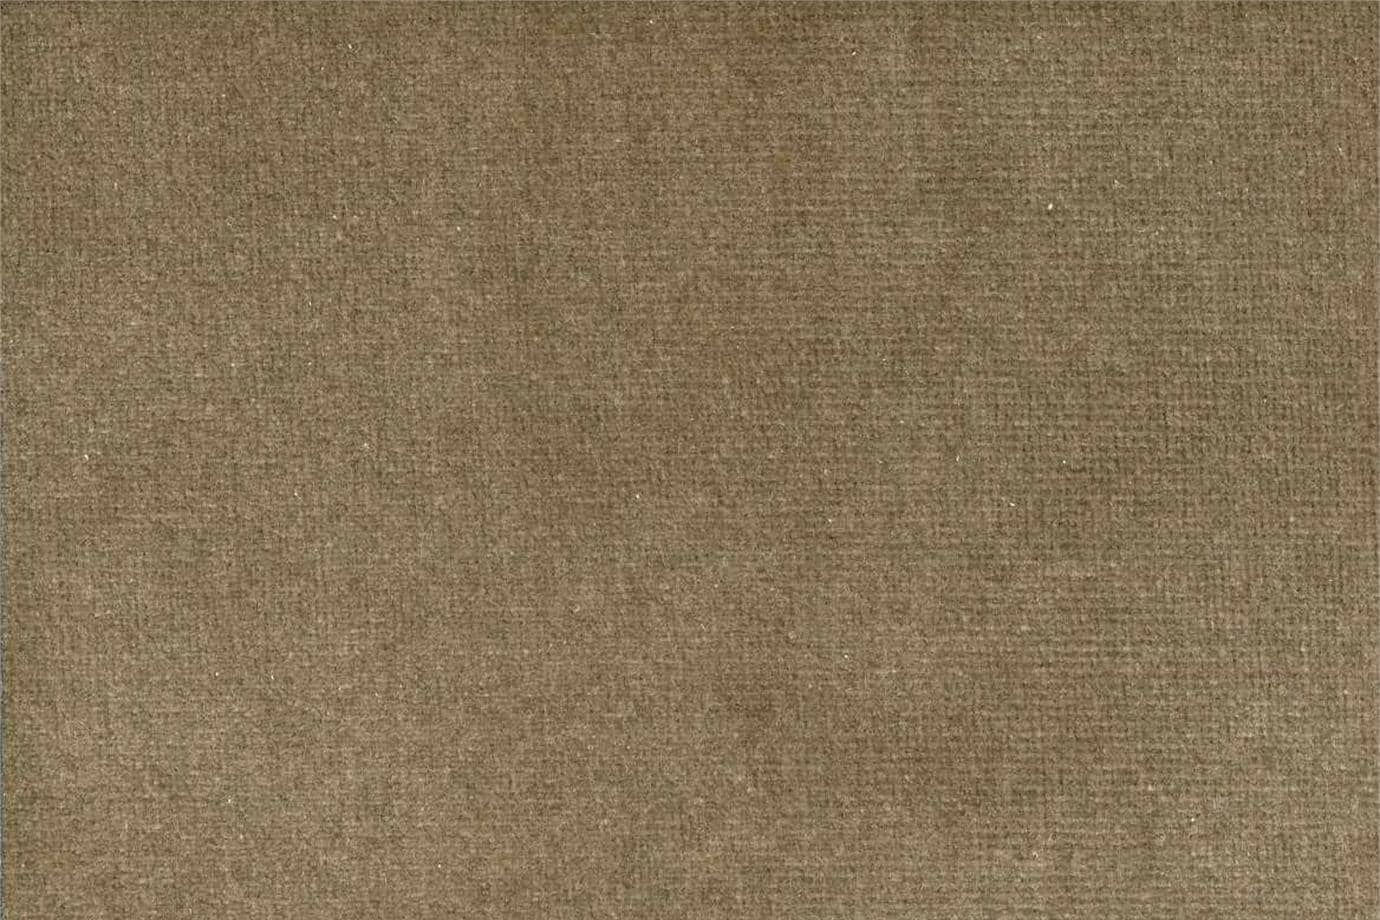 Tissu d'ameublement JB014 SHADE 009 Cacao